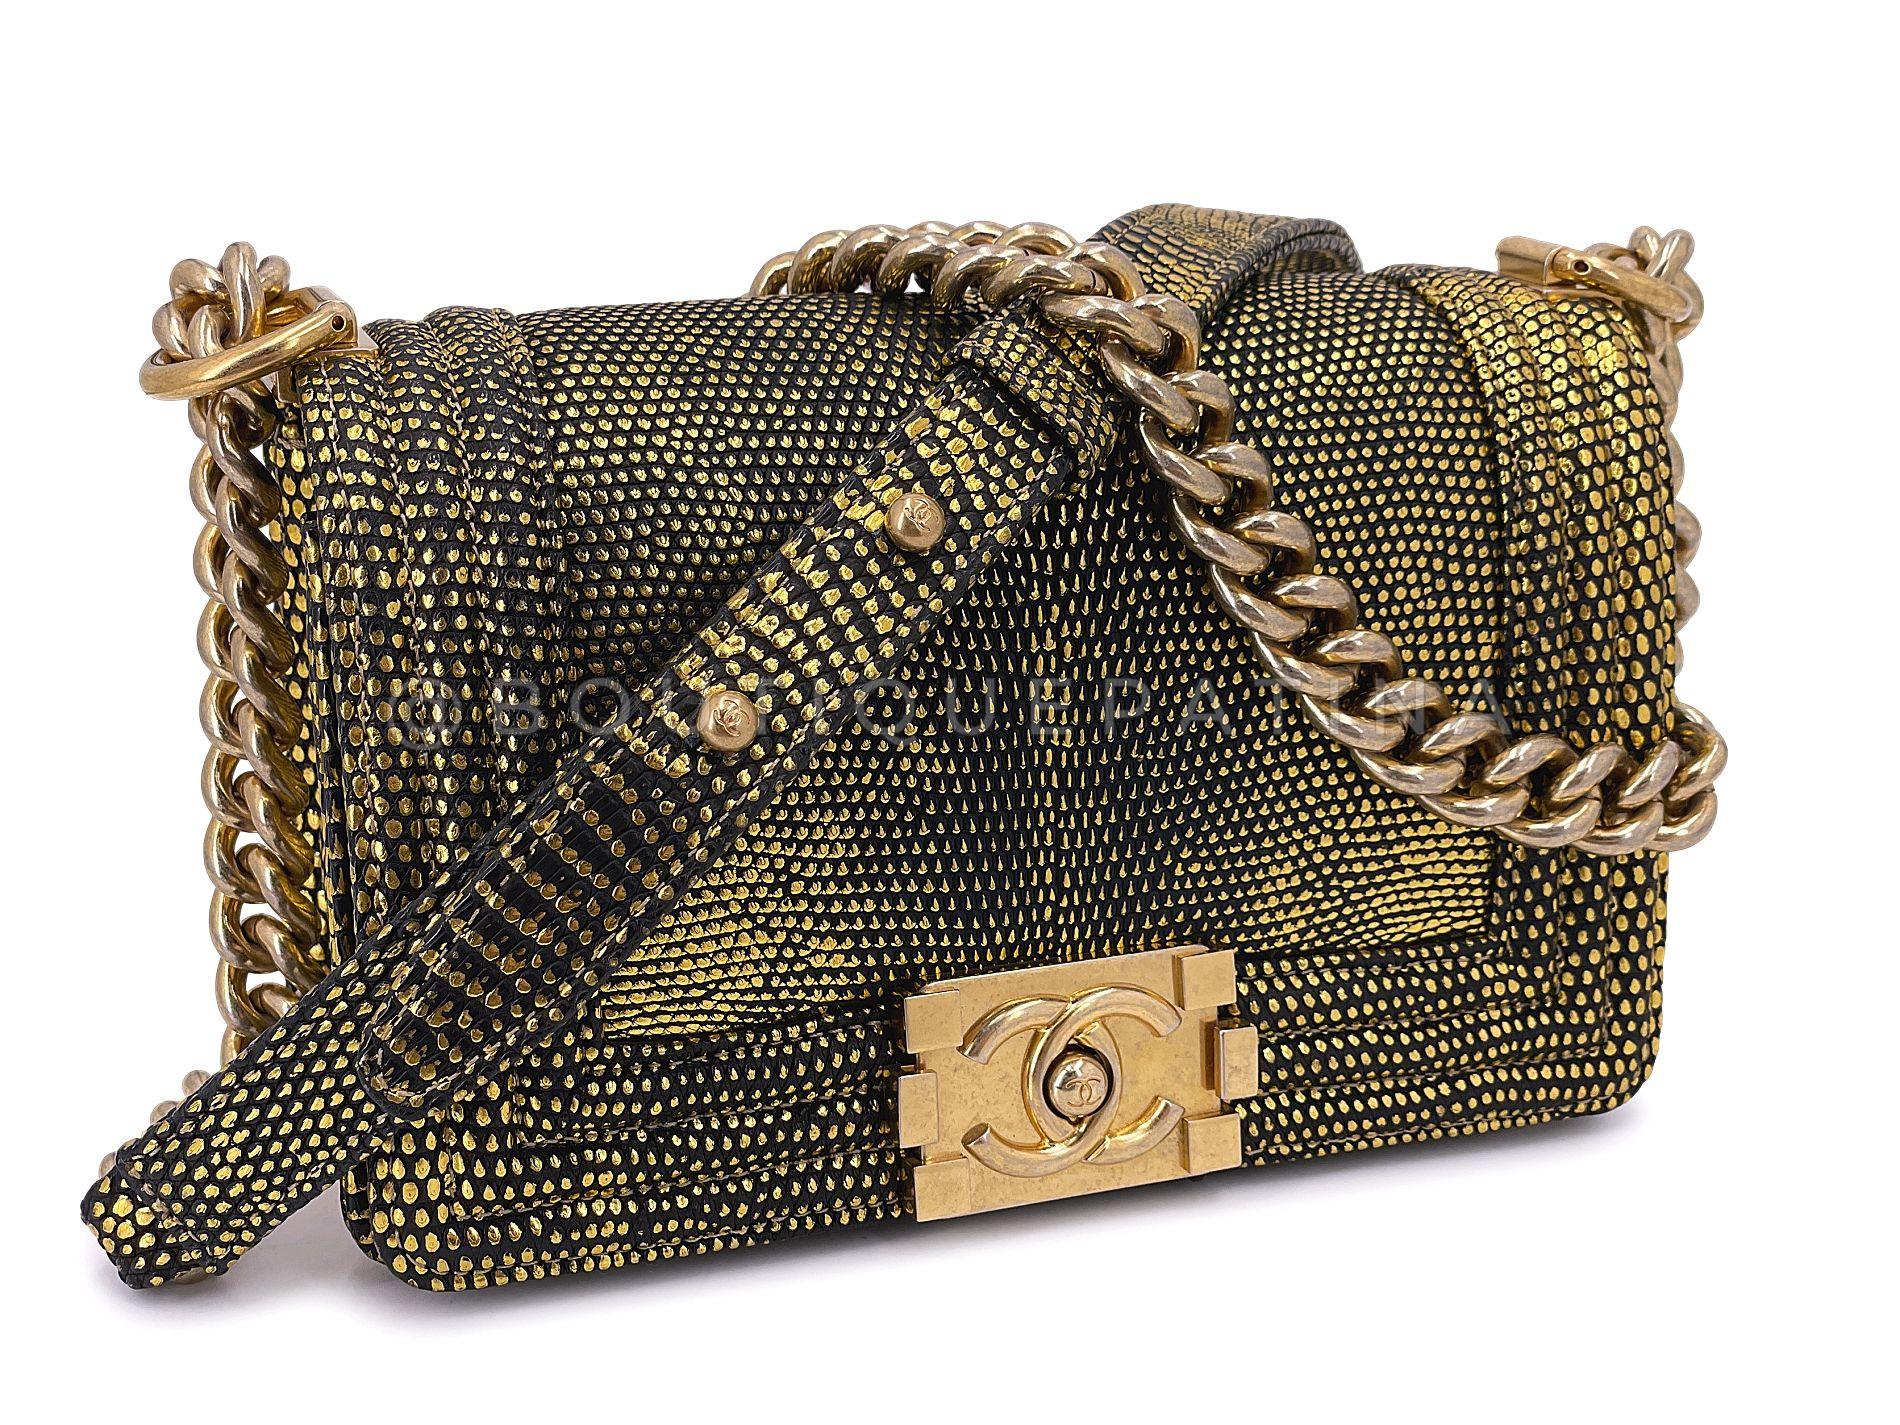 Store item: 67969
No longer produced in special exotics, this Chanel Gold Lizard Small Boy Flap Bag GHW comes in pristine condition in a very special ornate color way. 

The aged gold thick chunky chain can be worn long or short. Pinch clasp opens